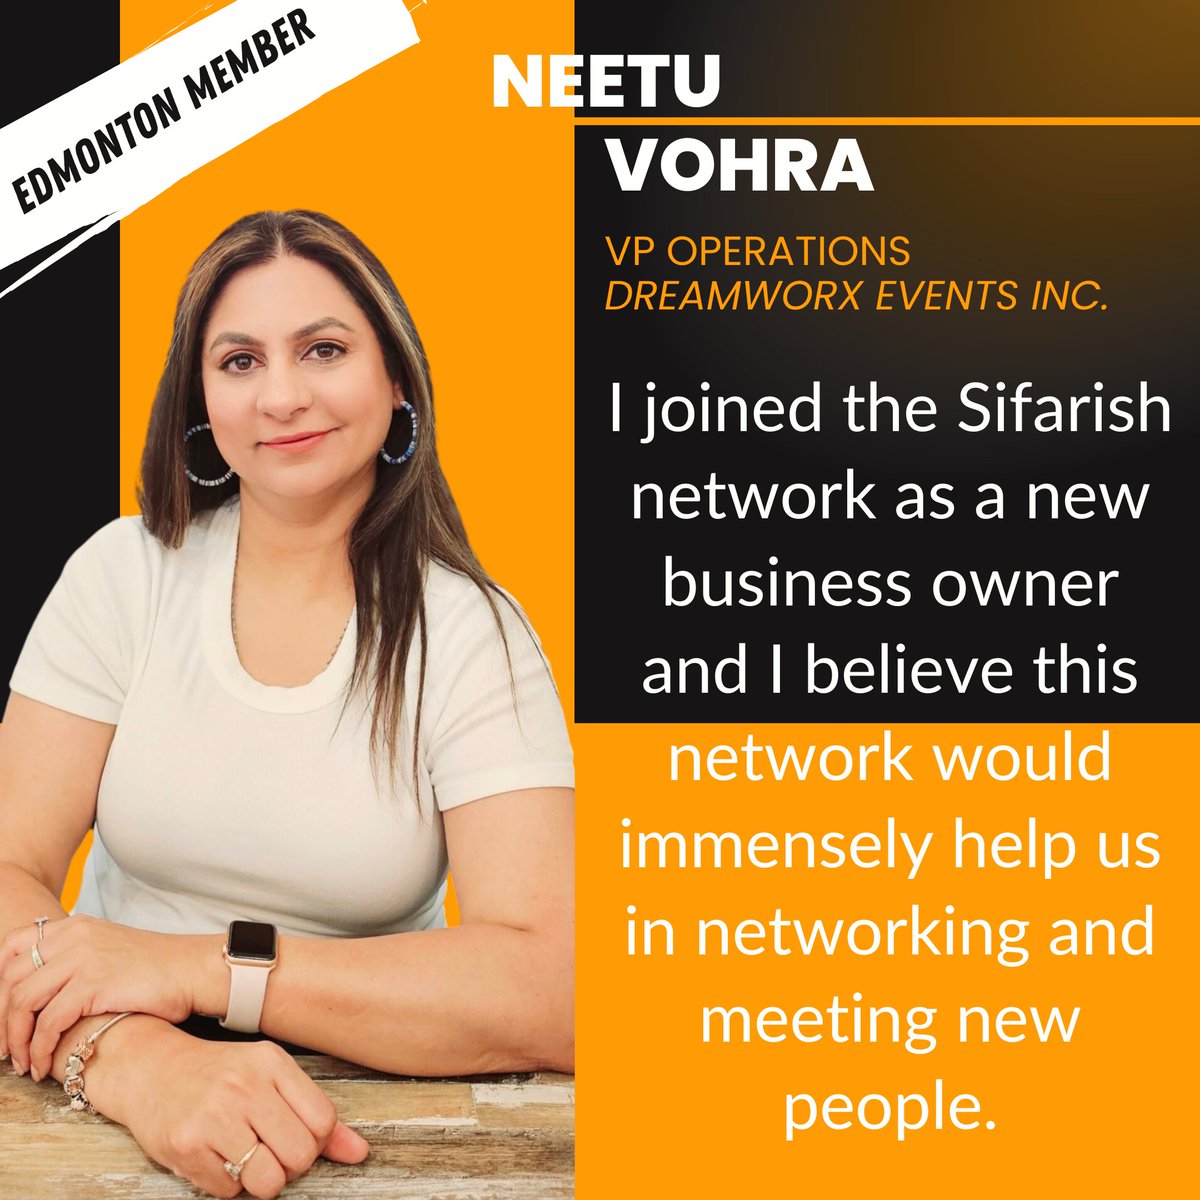 Welcome to this week’s #MembershipMonday ! This week, we feature Neetu Vohra! 

#sifarish #community #connection #collaboration #southasian #business #professional #partyplanning #weddingplanning #djservices #liveperformances #dancers #photography #videographers #bartrending